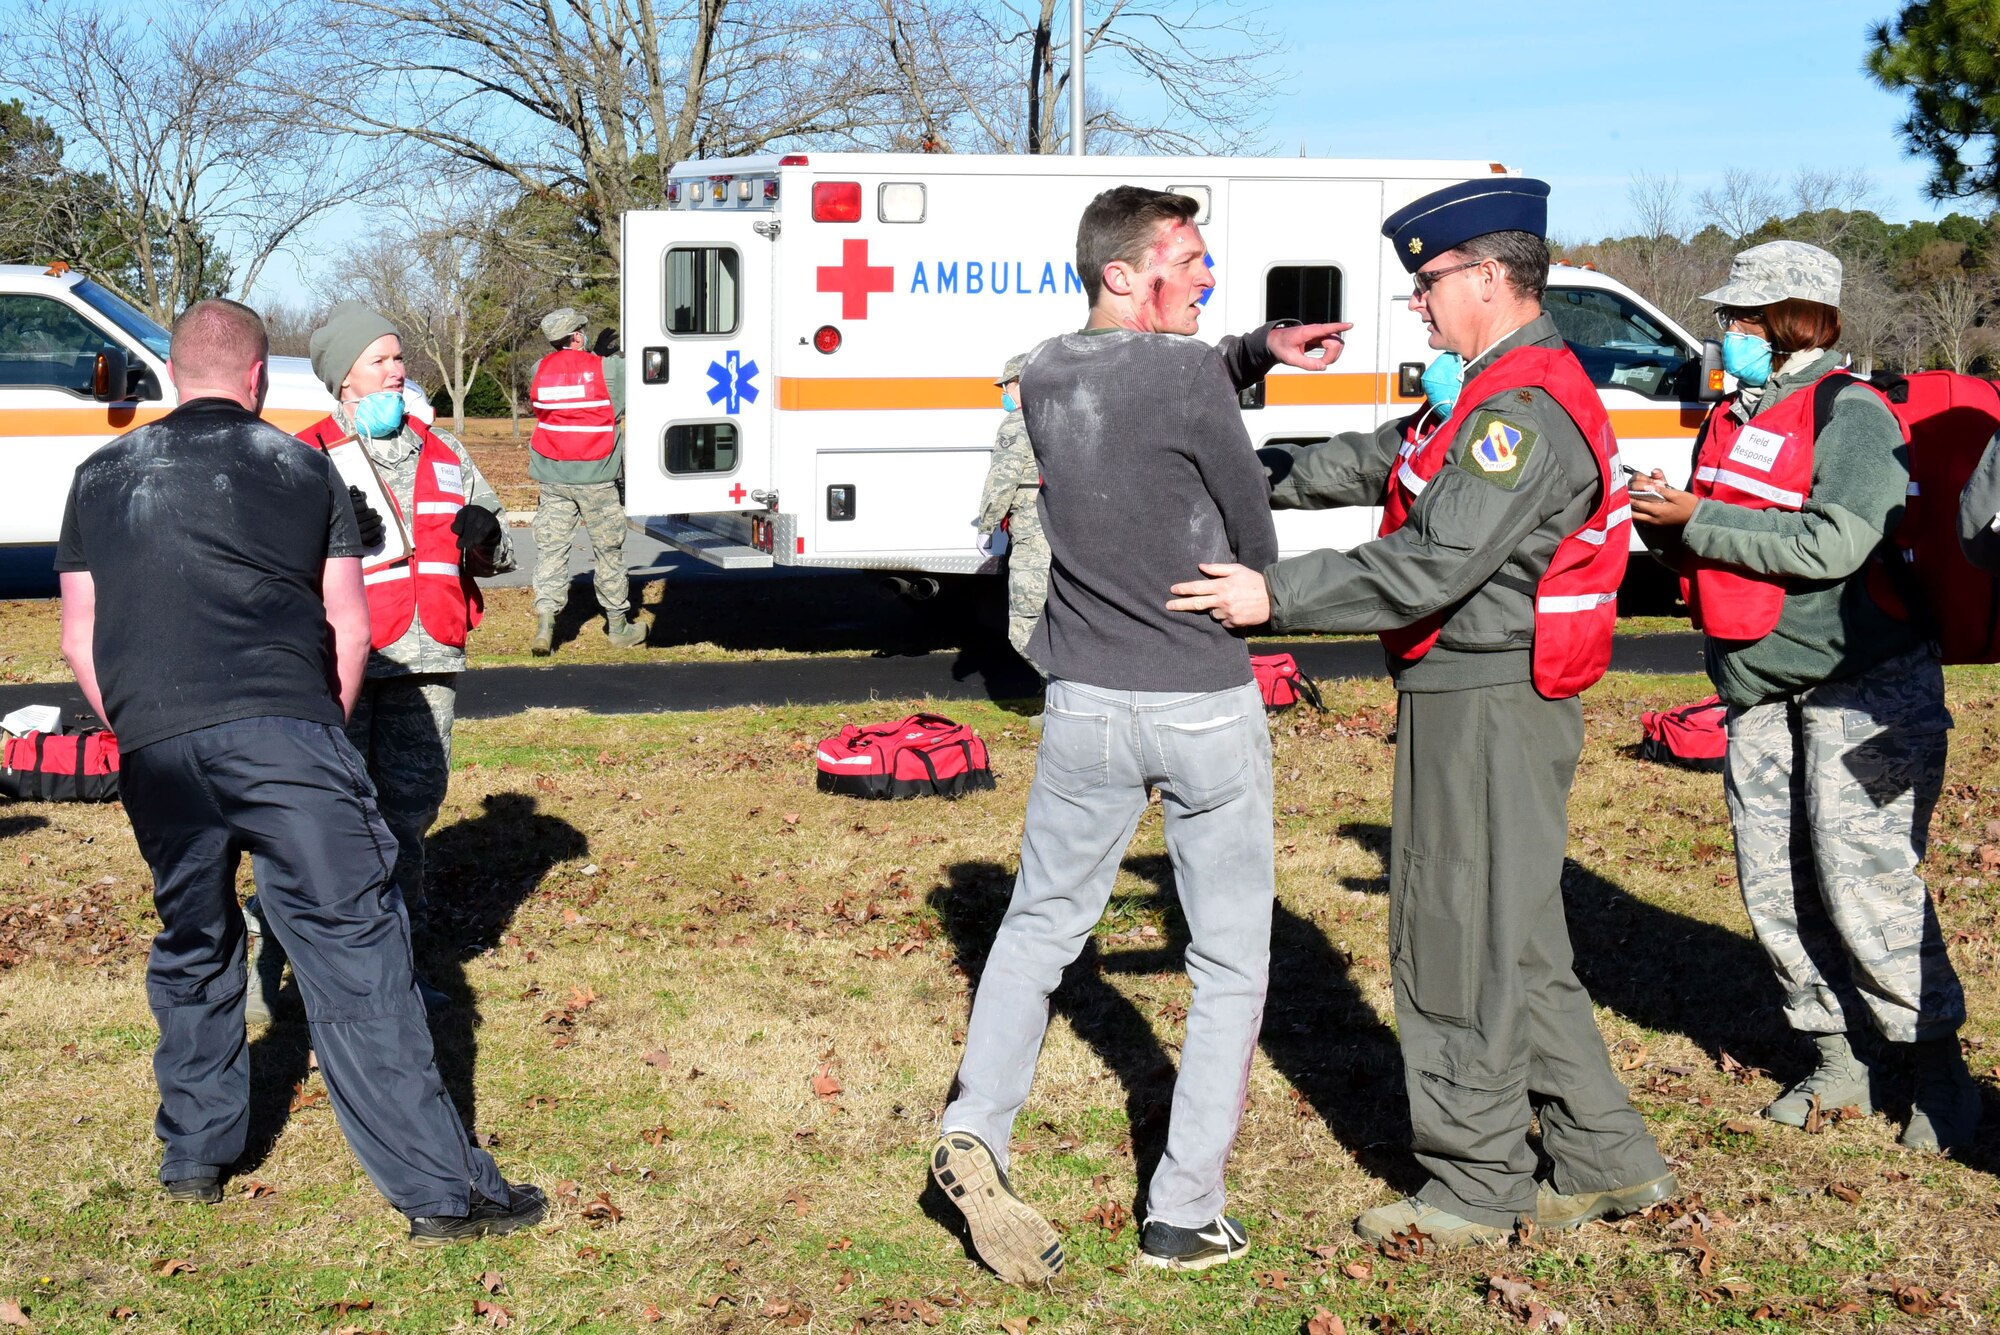 Members of the 4th Medical Group respond to exercise participants with simulated injuries during a mass casualty exercise Dec. 13, 2017, at Seymour Johnson Air Force Base, North Carolina.